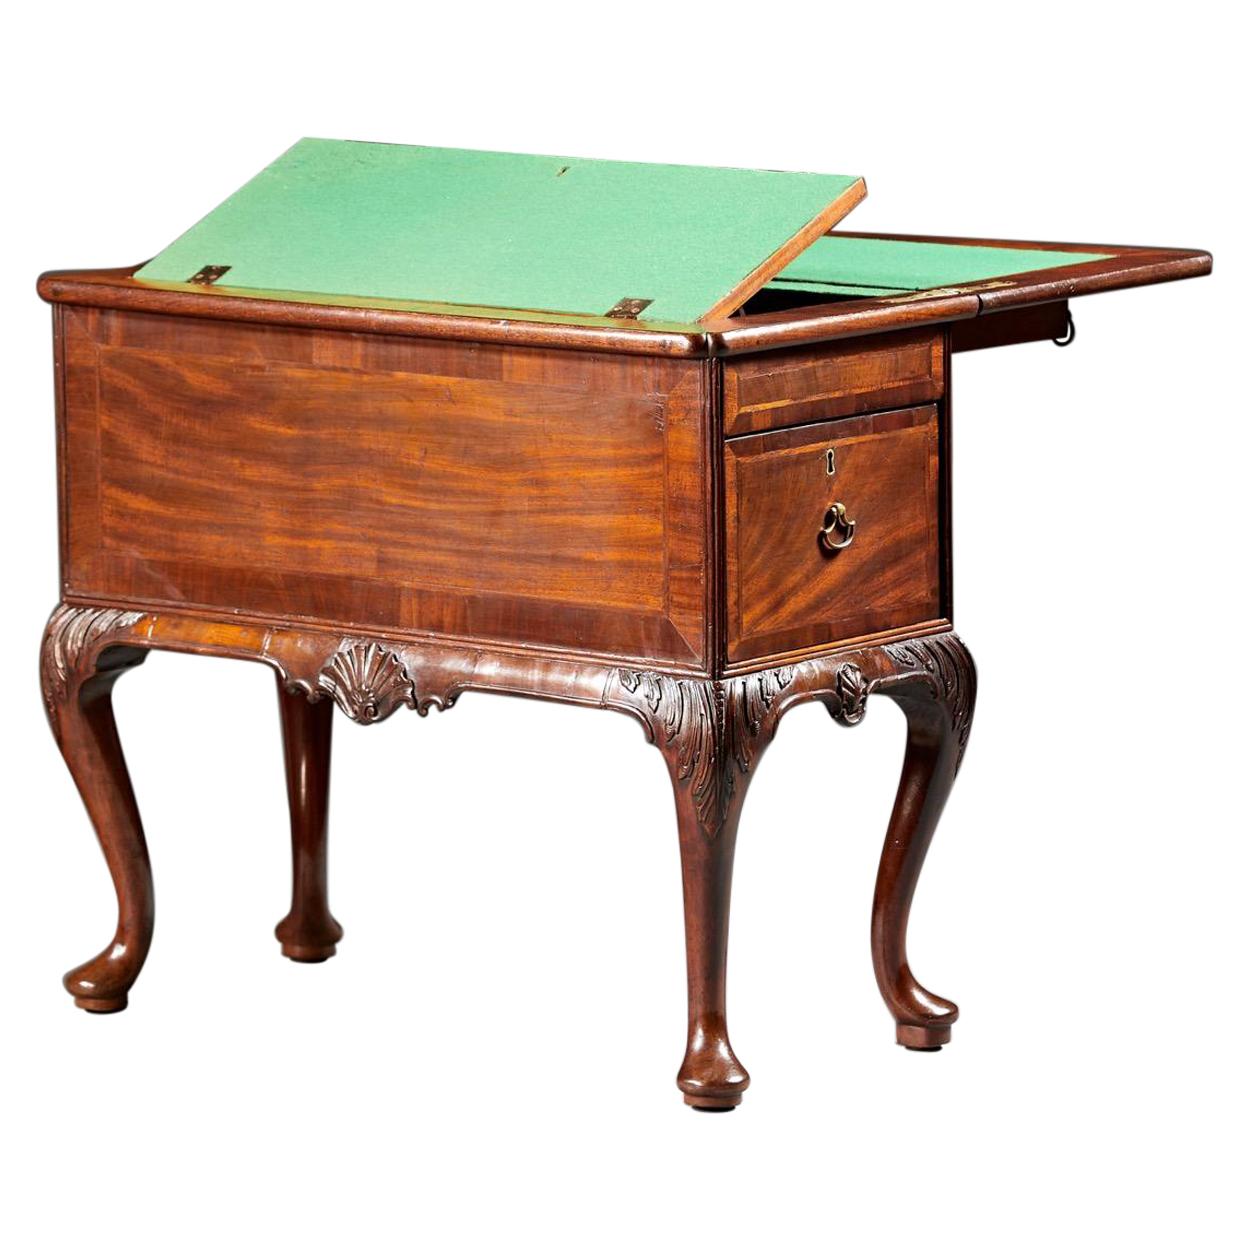 Early Georgian Counting Table